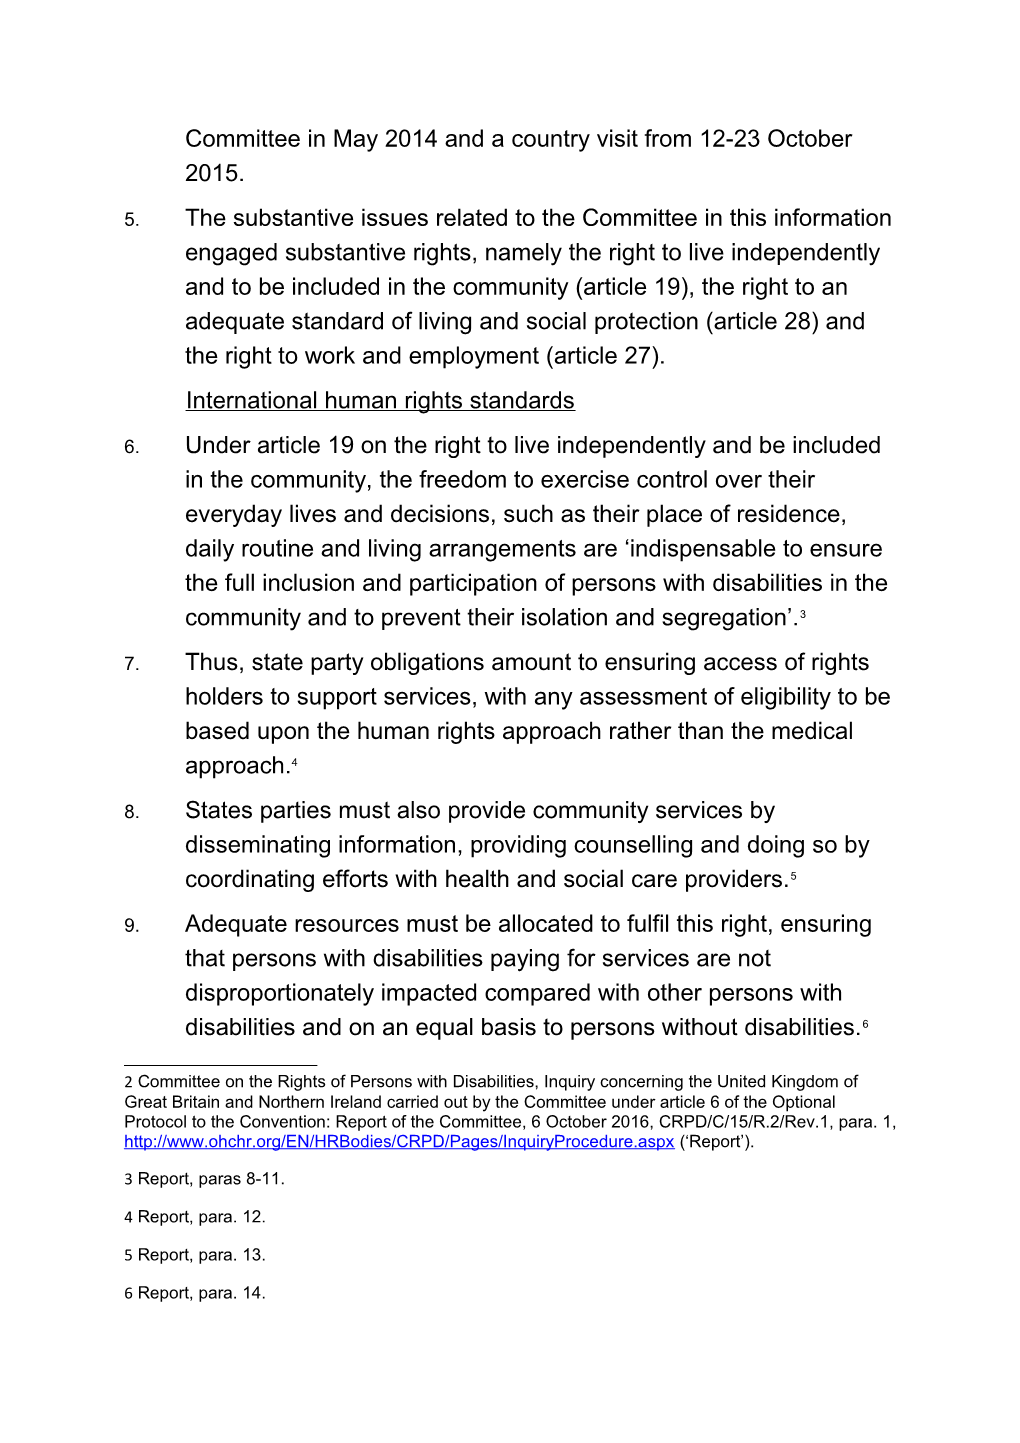 UNCRPD Inquiry (Summary of Findings & UK State Party Response)